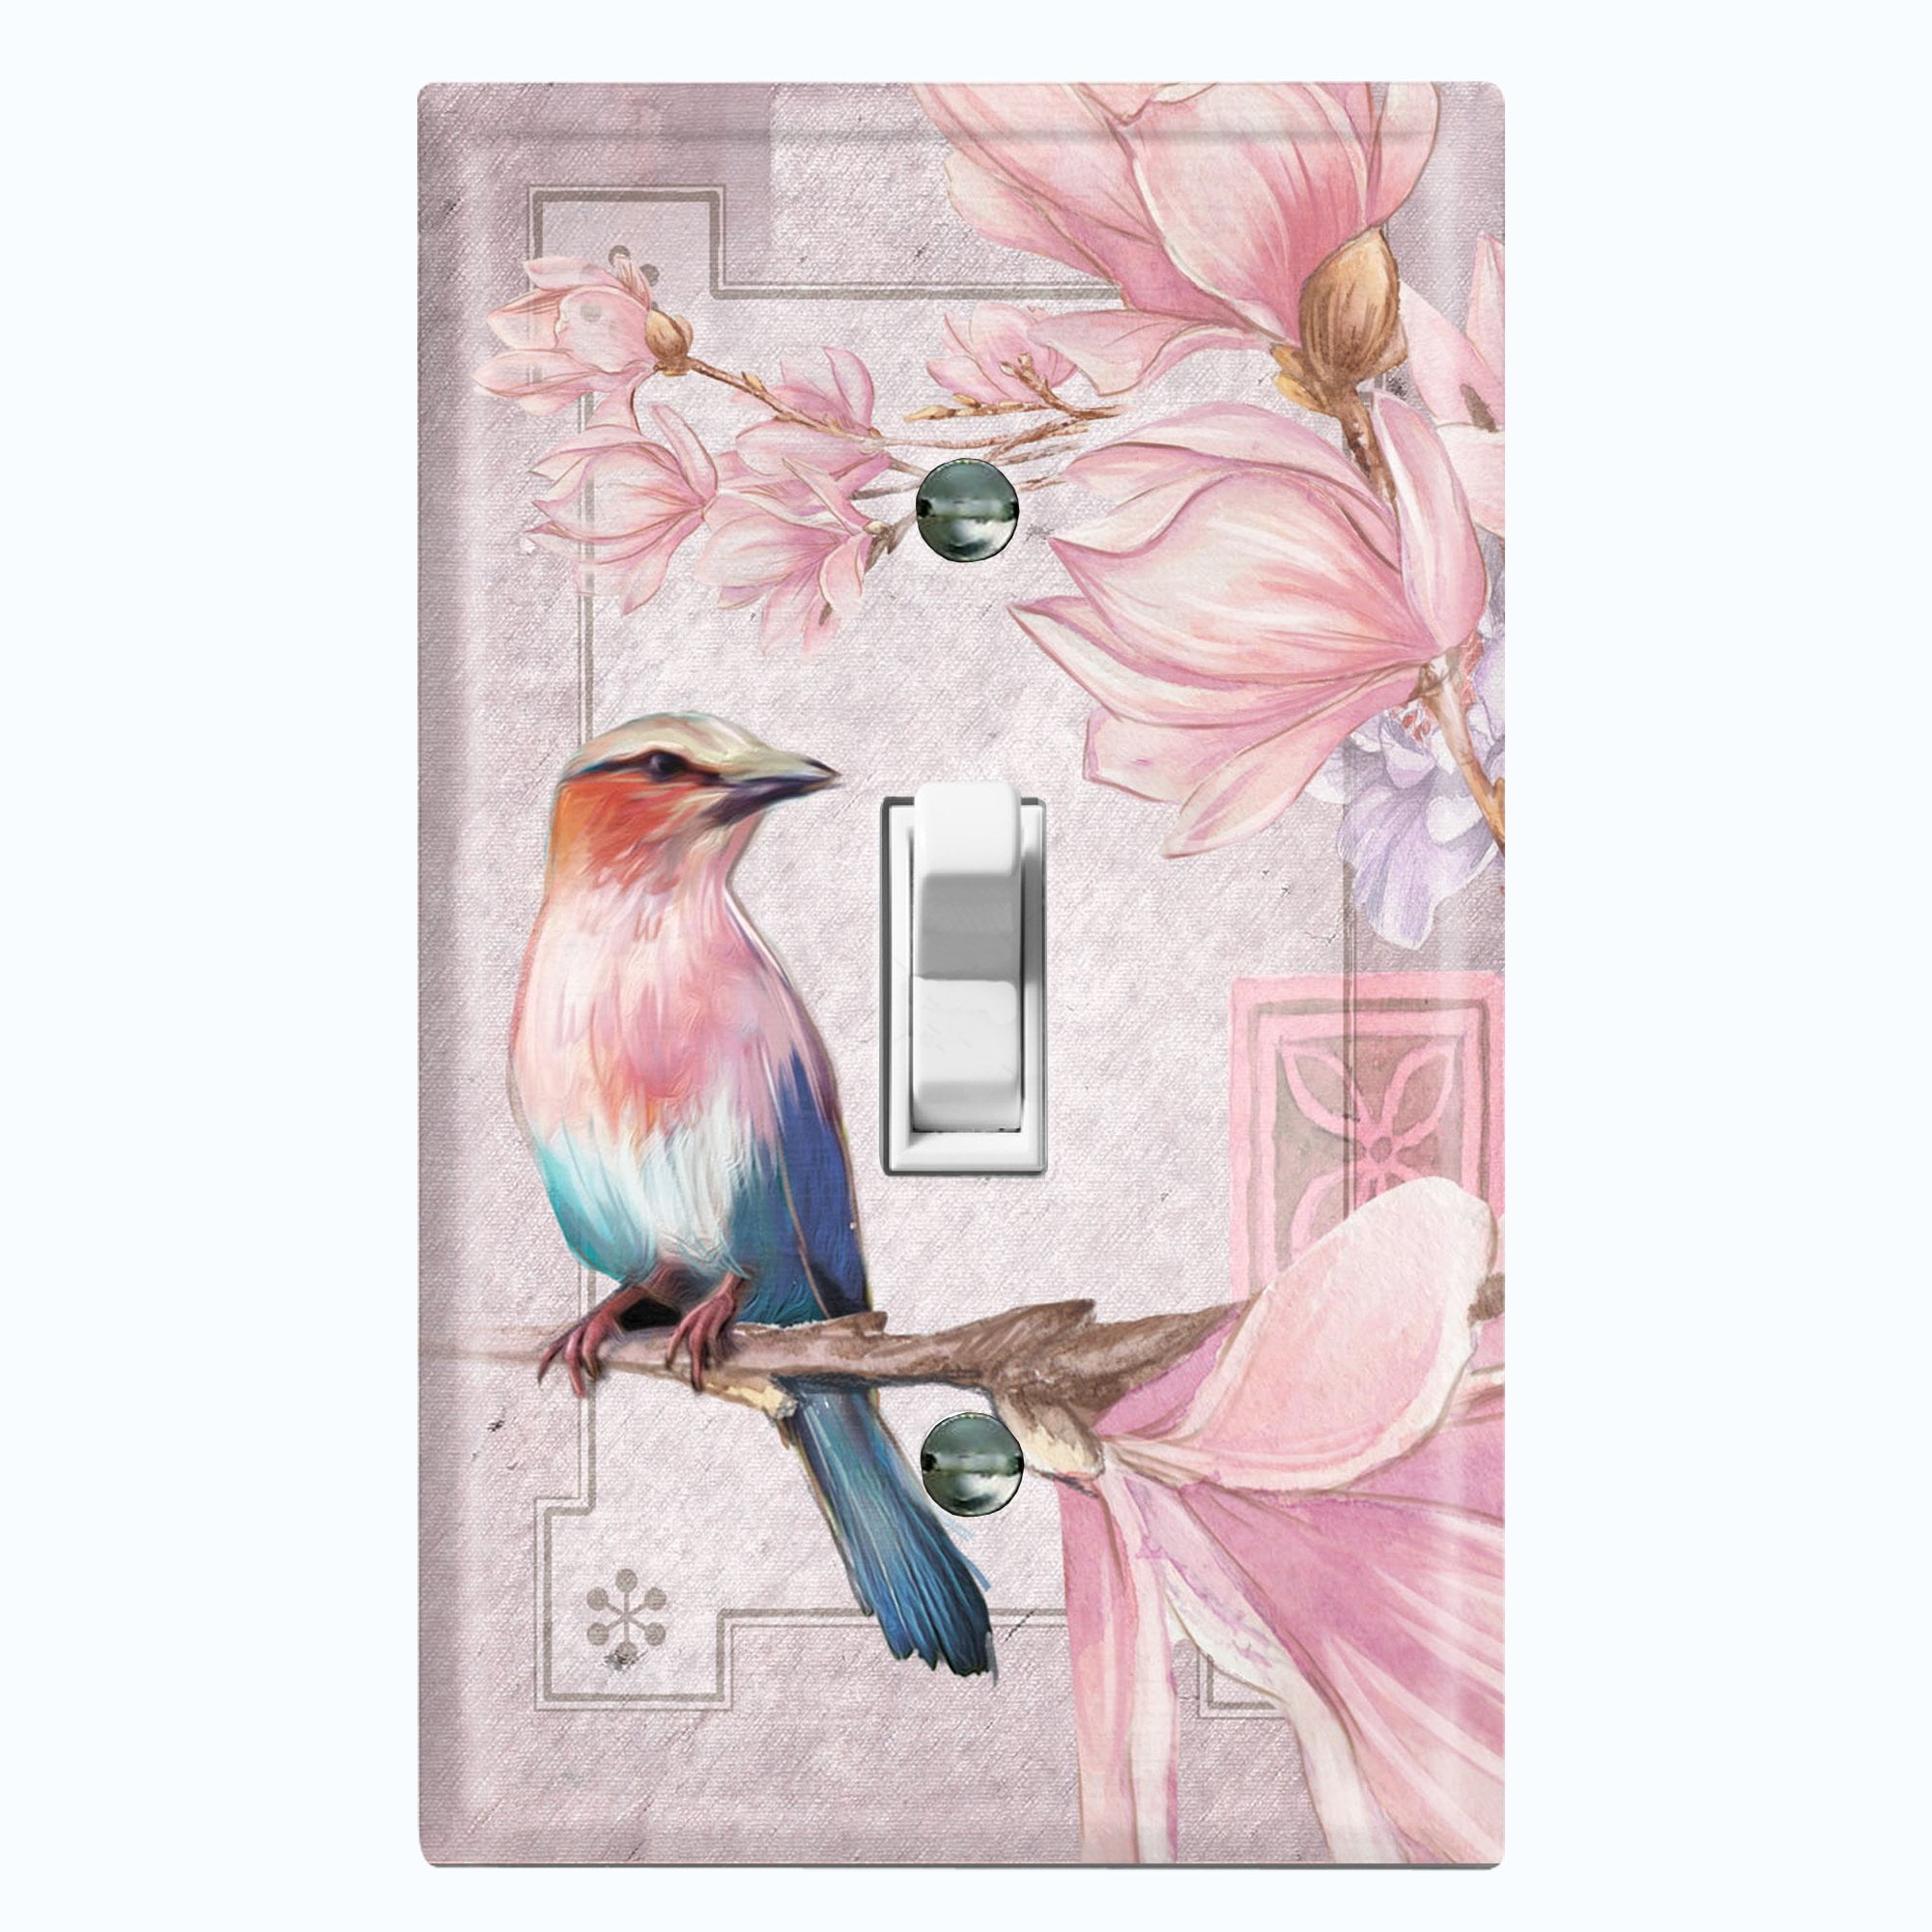 Graphics Art Toggle/Rocker/GFCI/Outlet Wall Plate Hummingbirds Painting 